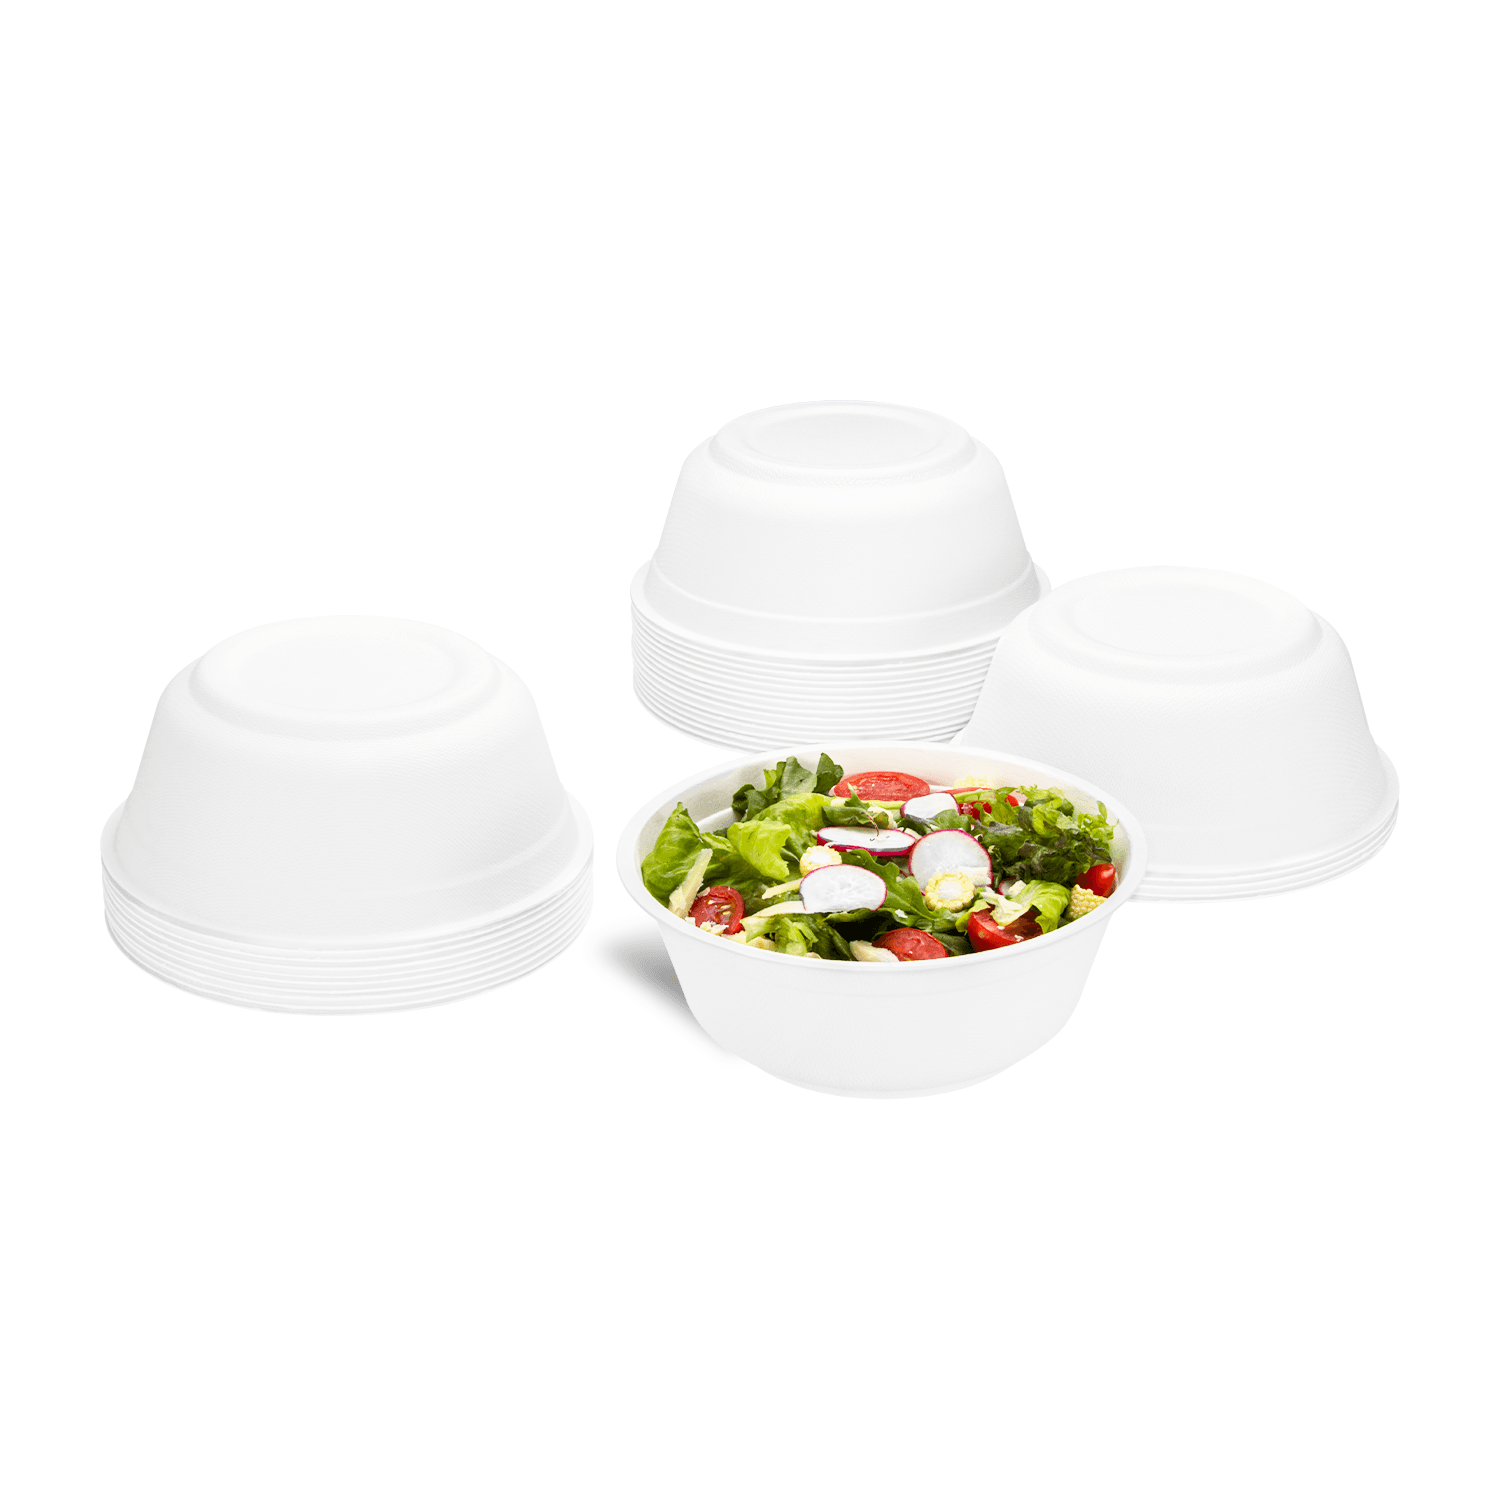 Karat Earth 32oz PFAS Free Bagasse Eco-Friendly Rice Bowls stacked and one with salad